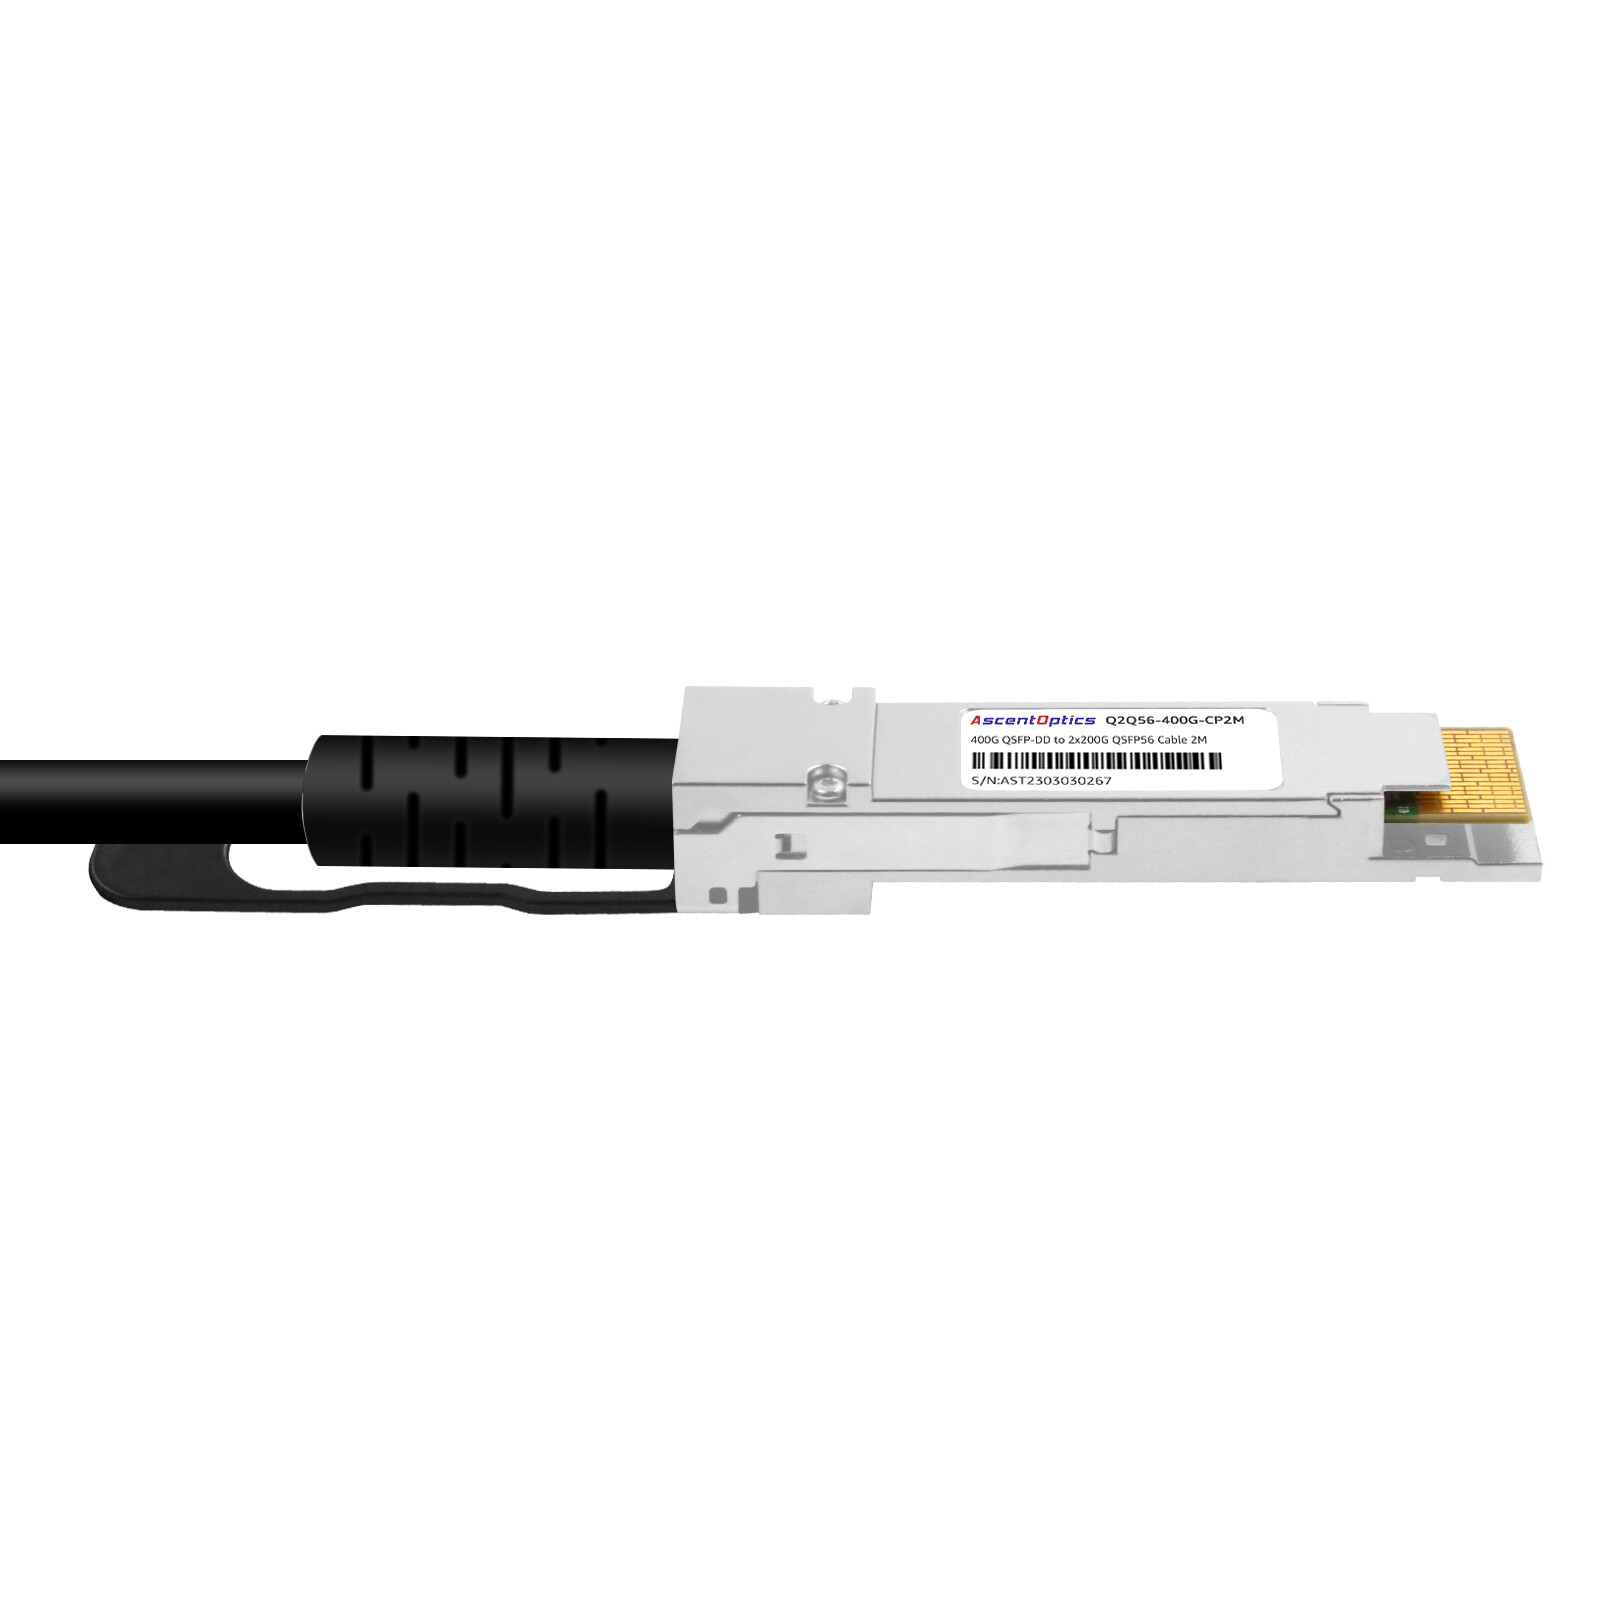 400G QSFP-DD to 2x 200G QSFP56 Copper Breakout Cable,2 Meters,Passive